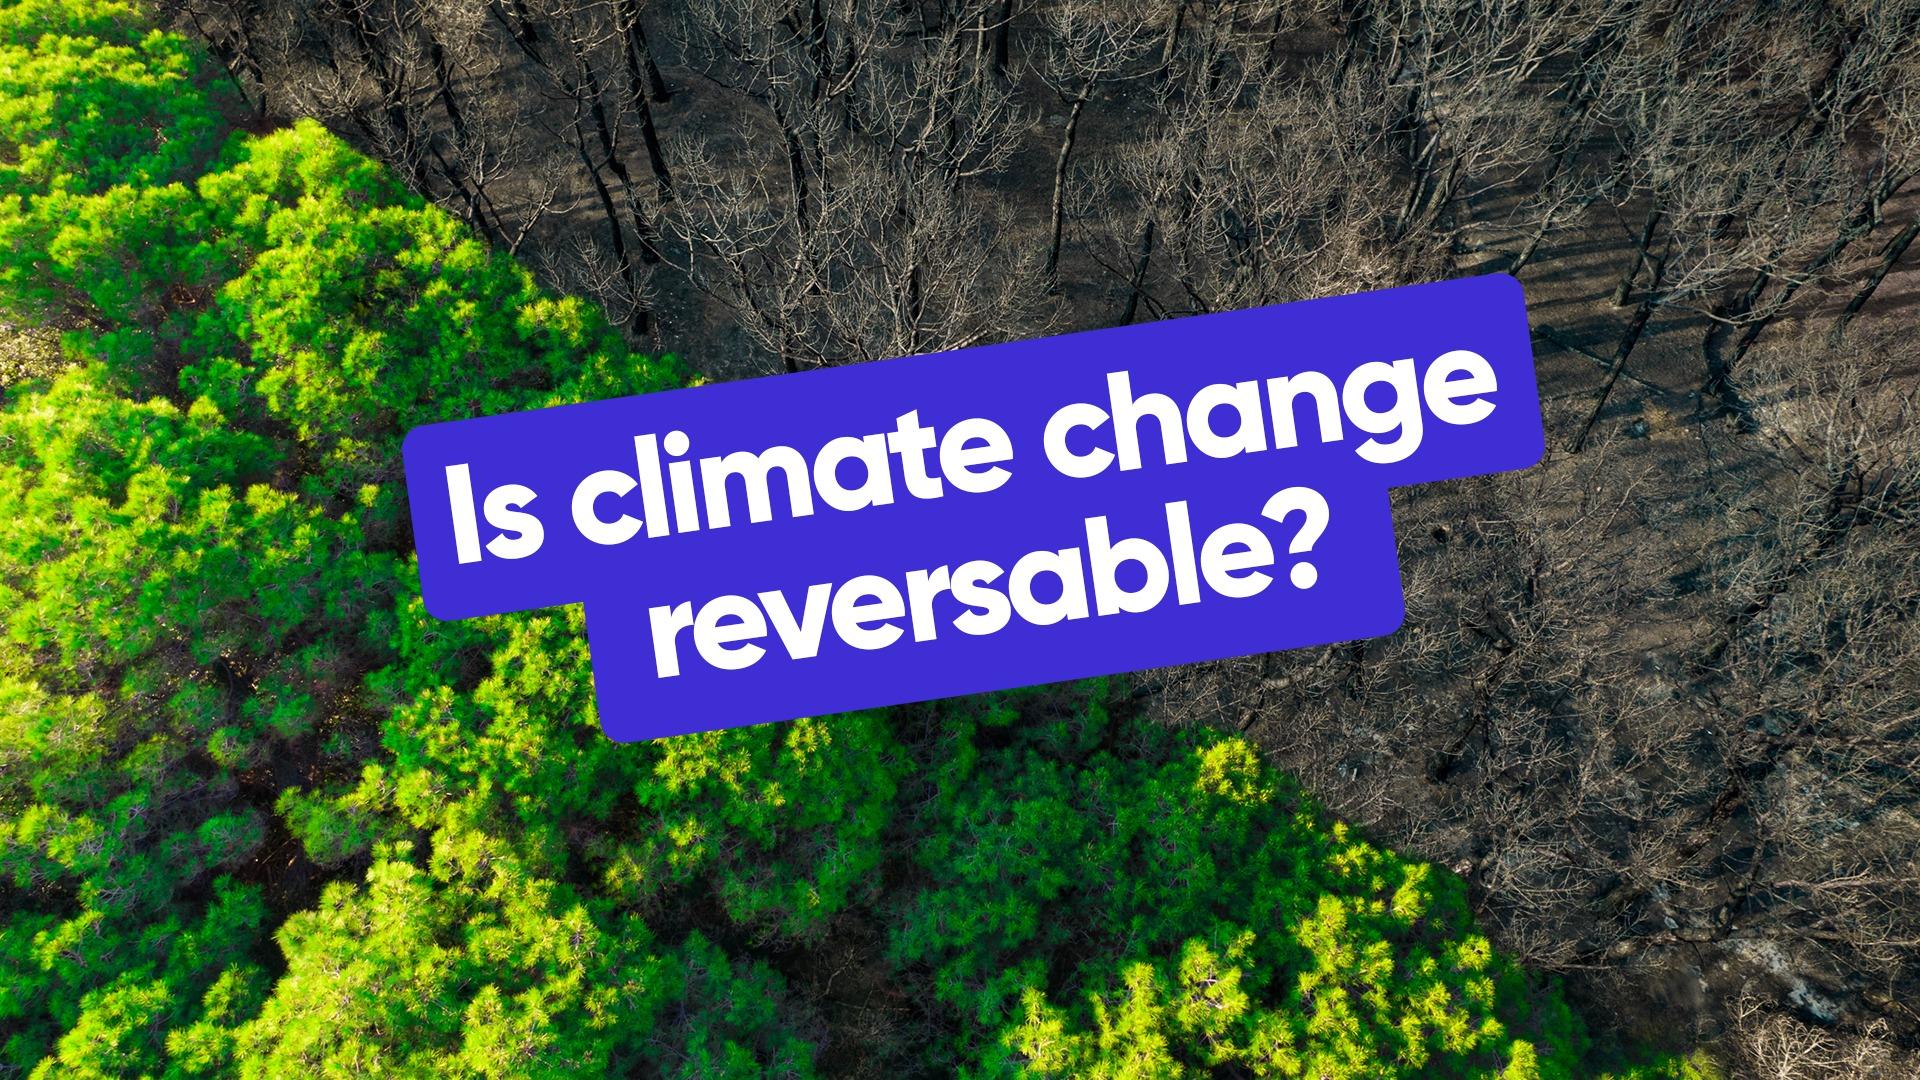 Is climate change reversable?